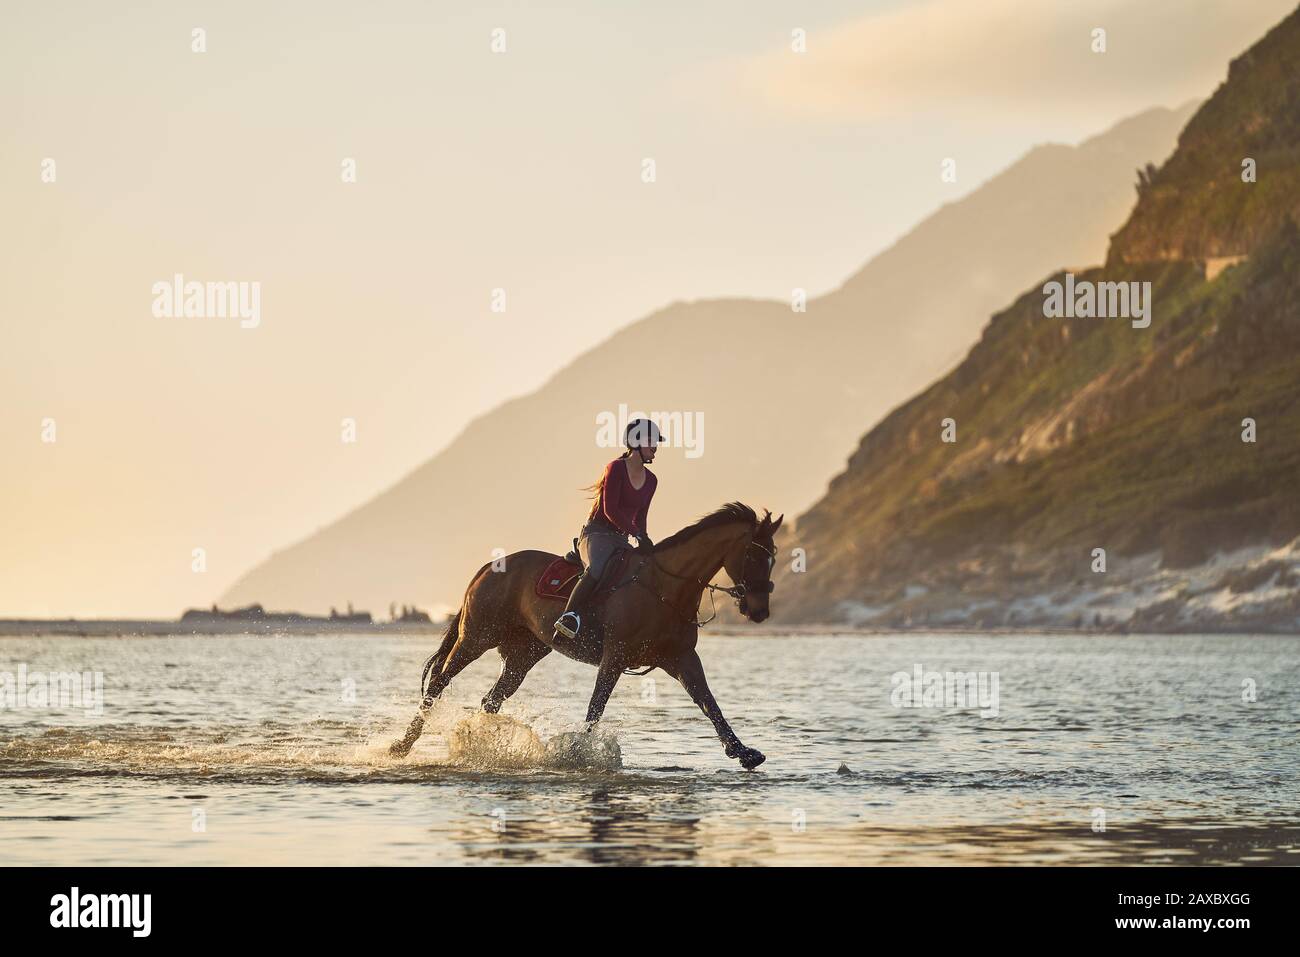 Young woman galloping on horseback in tranquil ocean surf Stock Photo